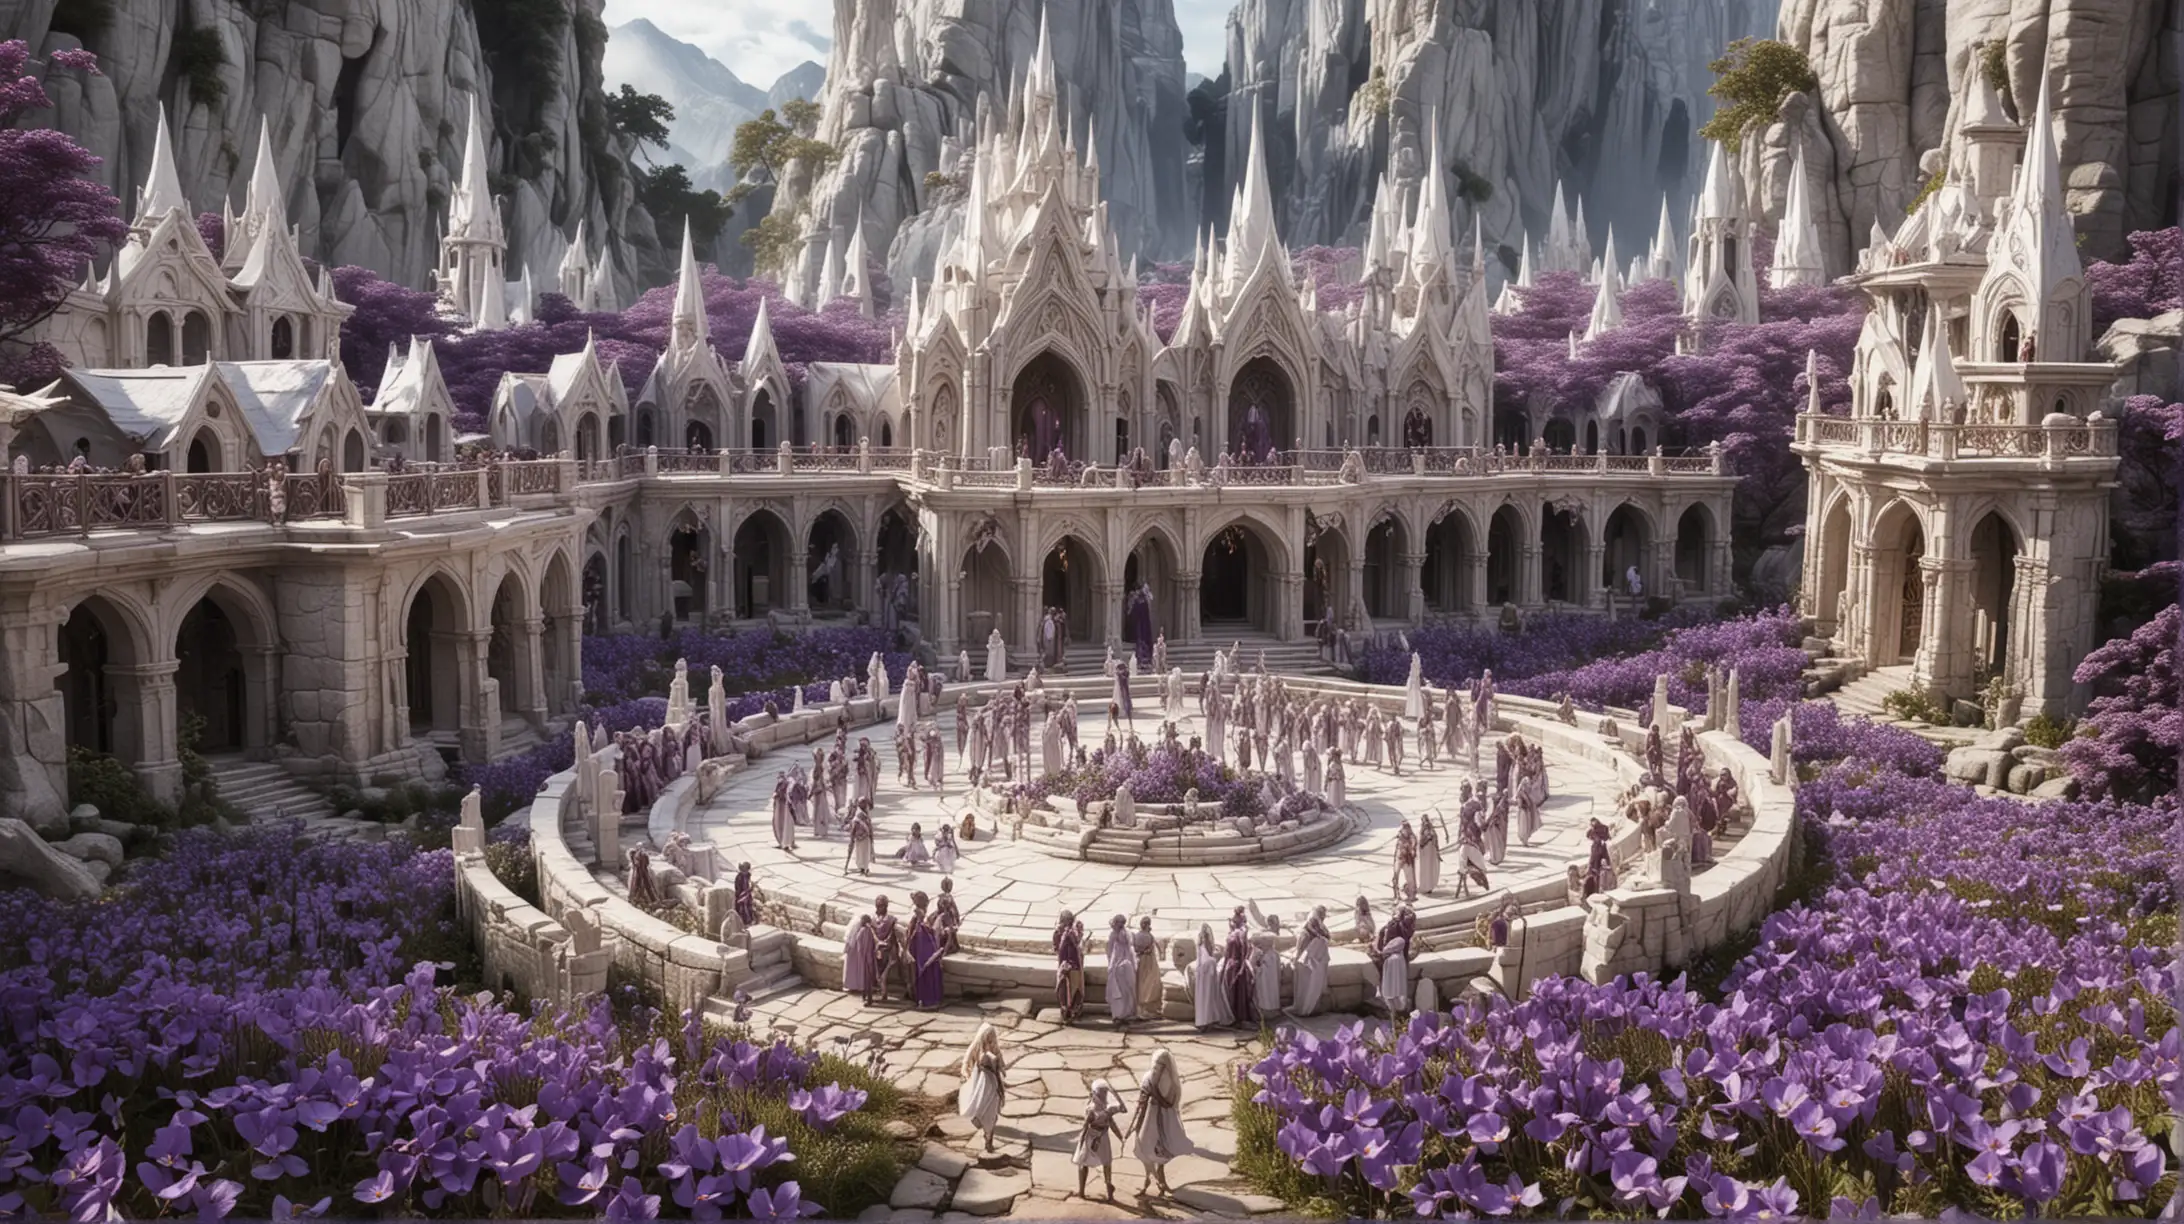 A gathering of violet-skinned elves in an elaborate white stone elven city.